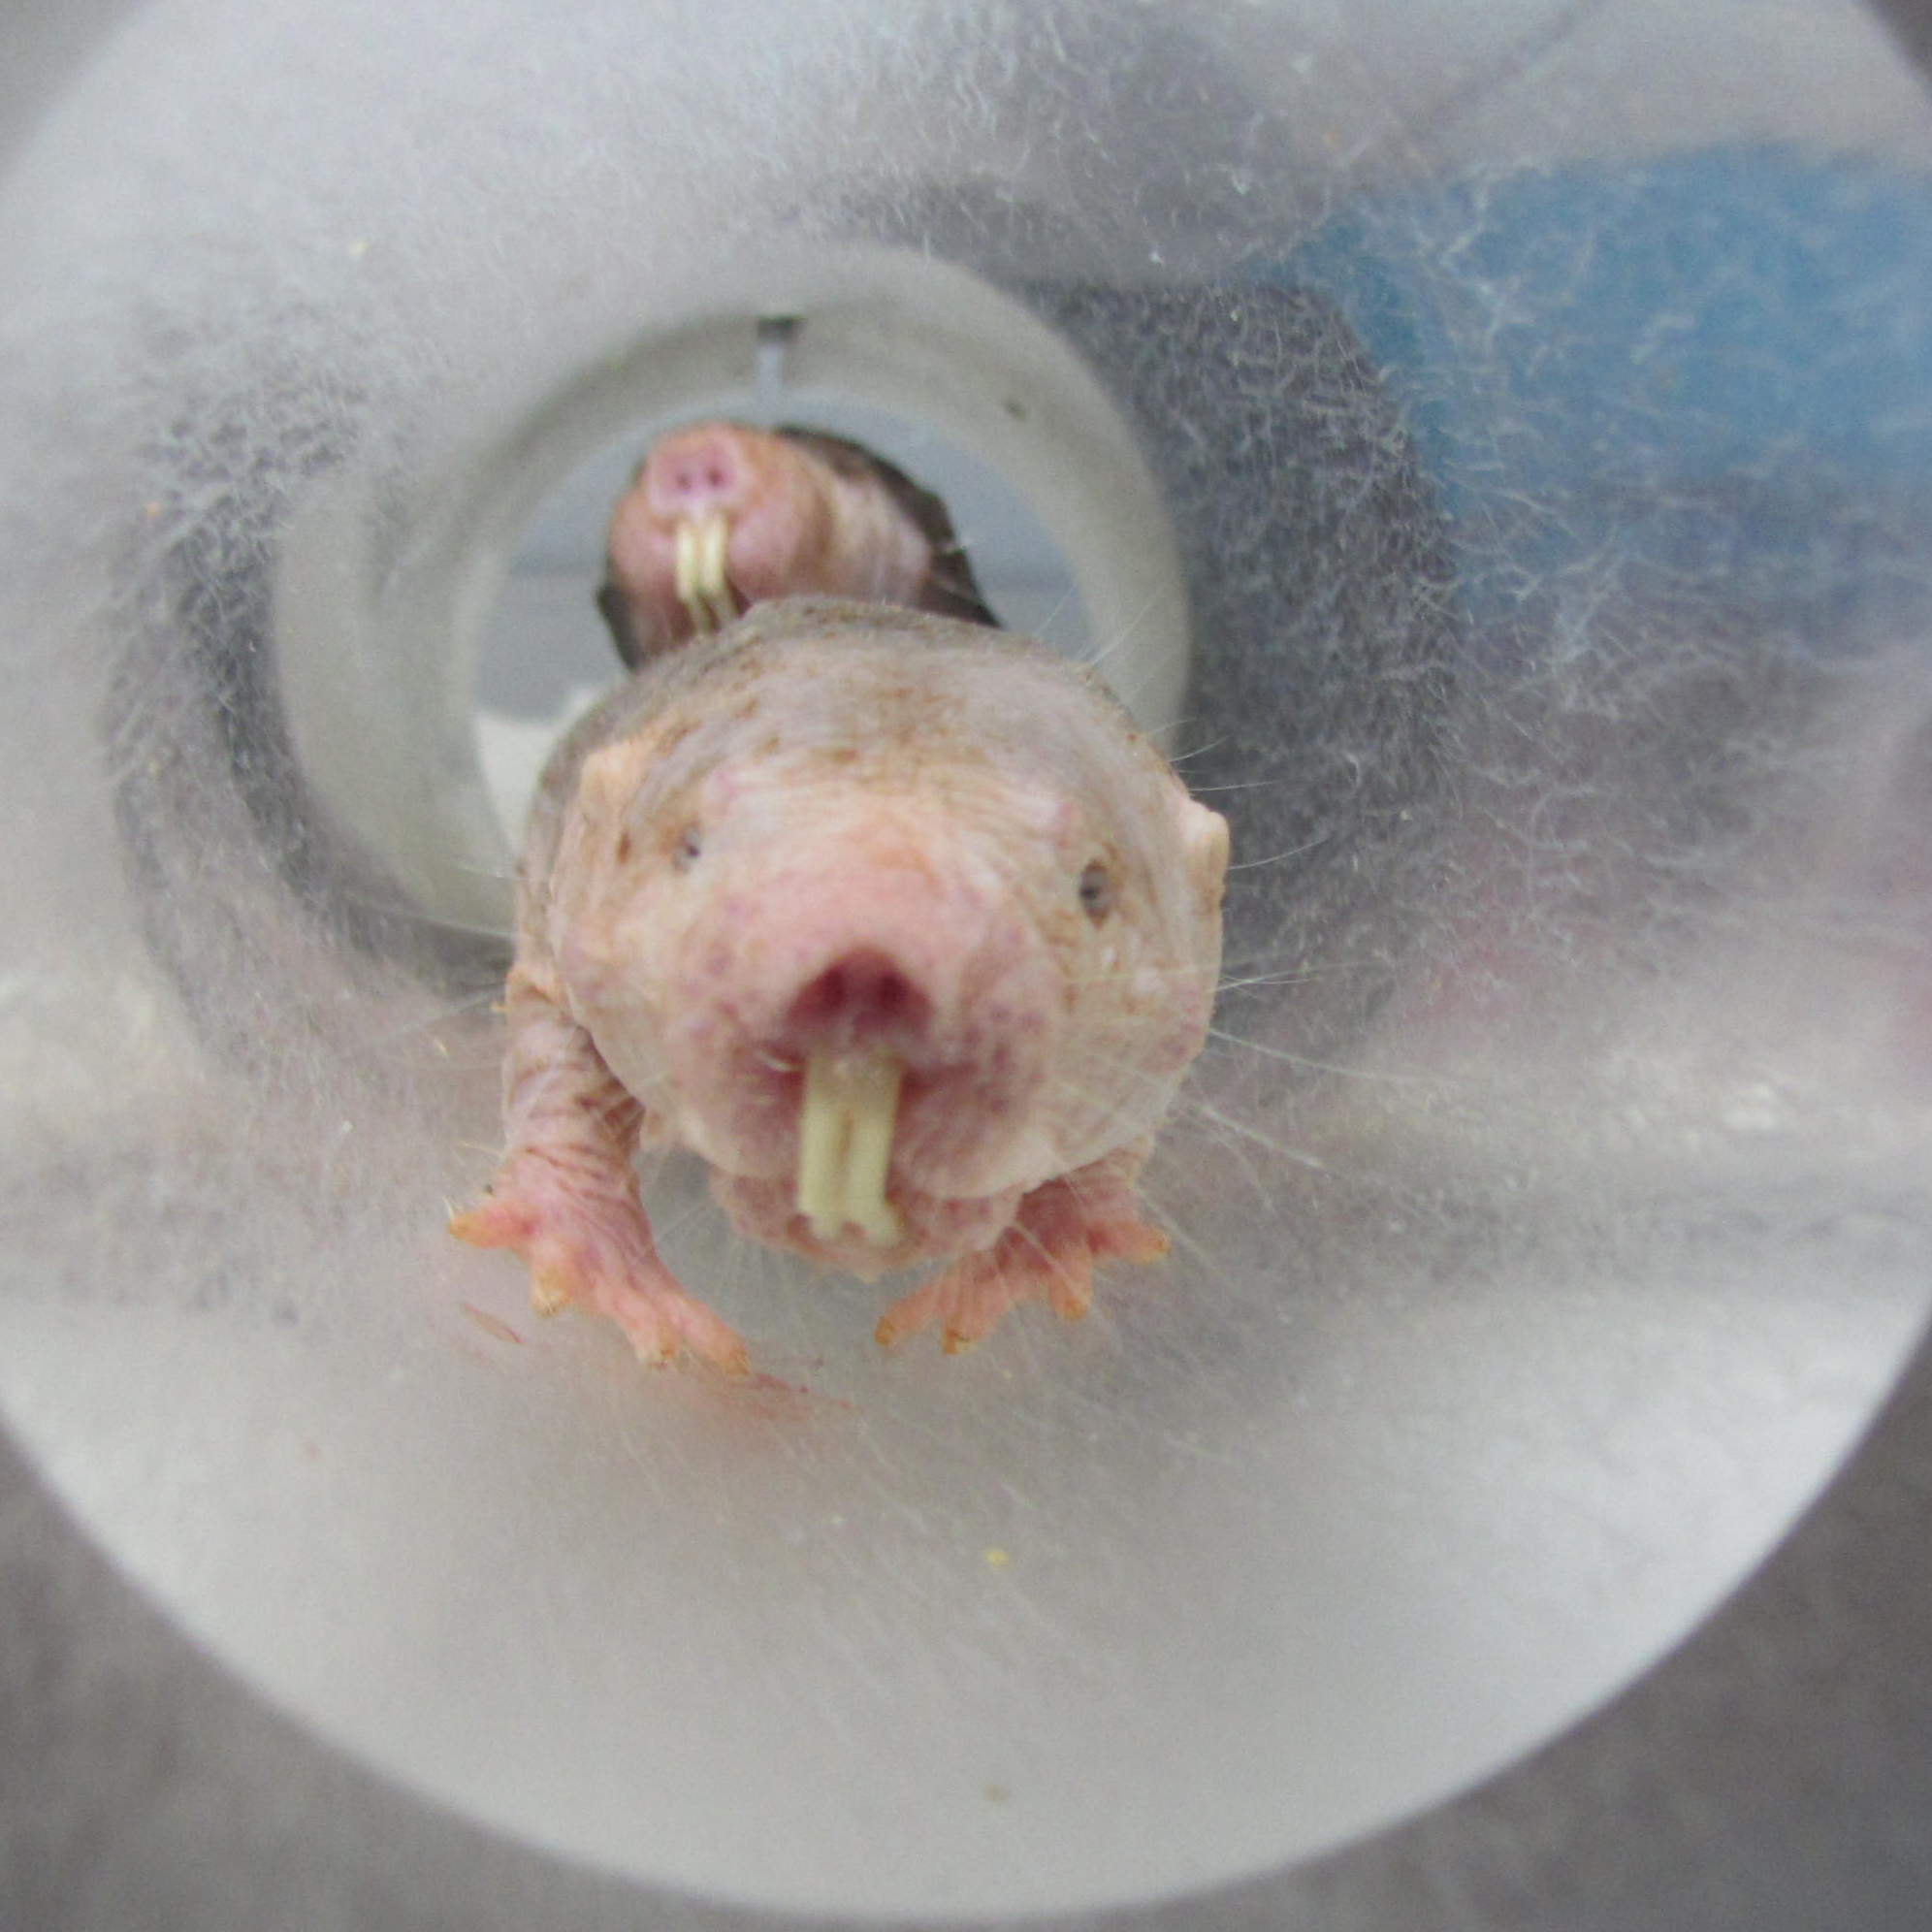 To deal with their miserable lives, naked mole rats have evolved to feel no  pain | Ars Technica